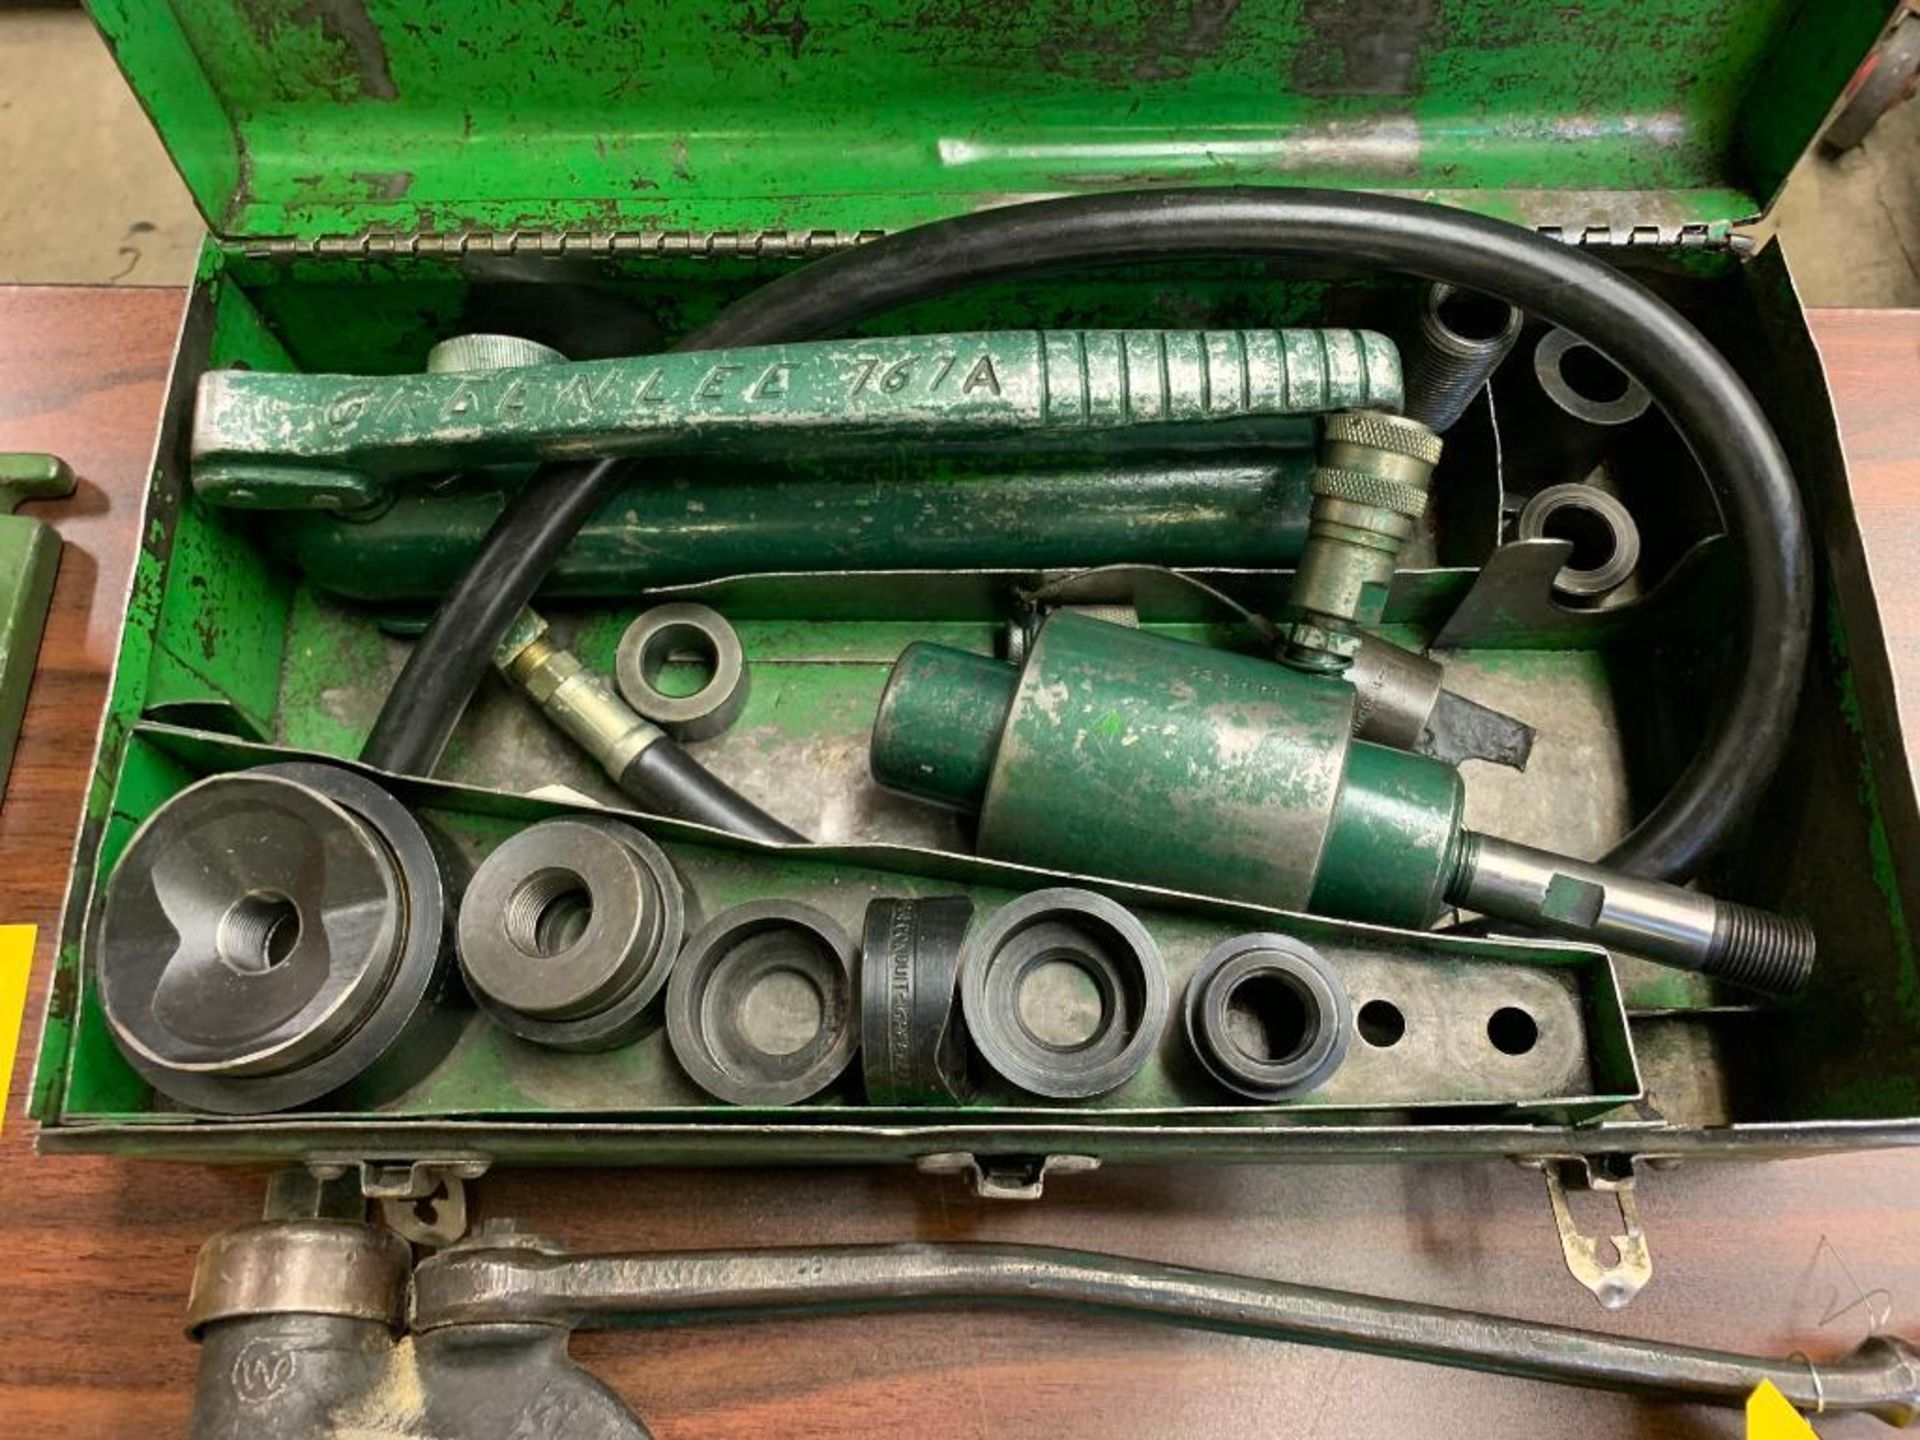 Greenlee Knock-Out Punch Set, Model 767A, Hyd. Hand Pump - Image 2 of 3